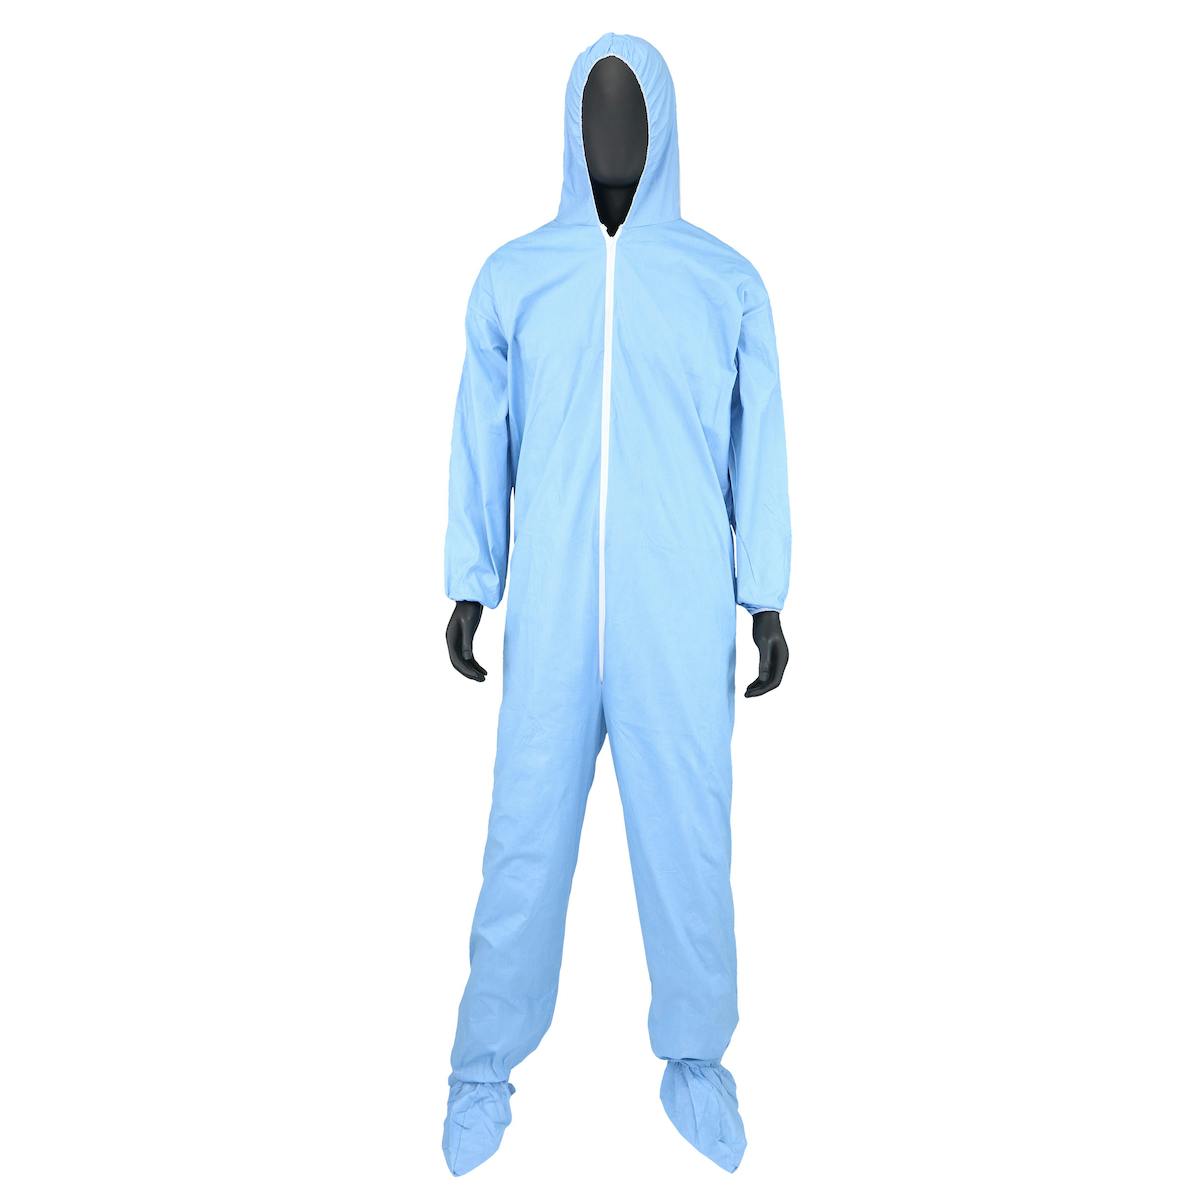 Posi-Wear Flame Resistant Coverall Hood, Boot, Elastic Wrist & Ankle, 80 gsm, Blue (3109)